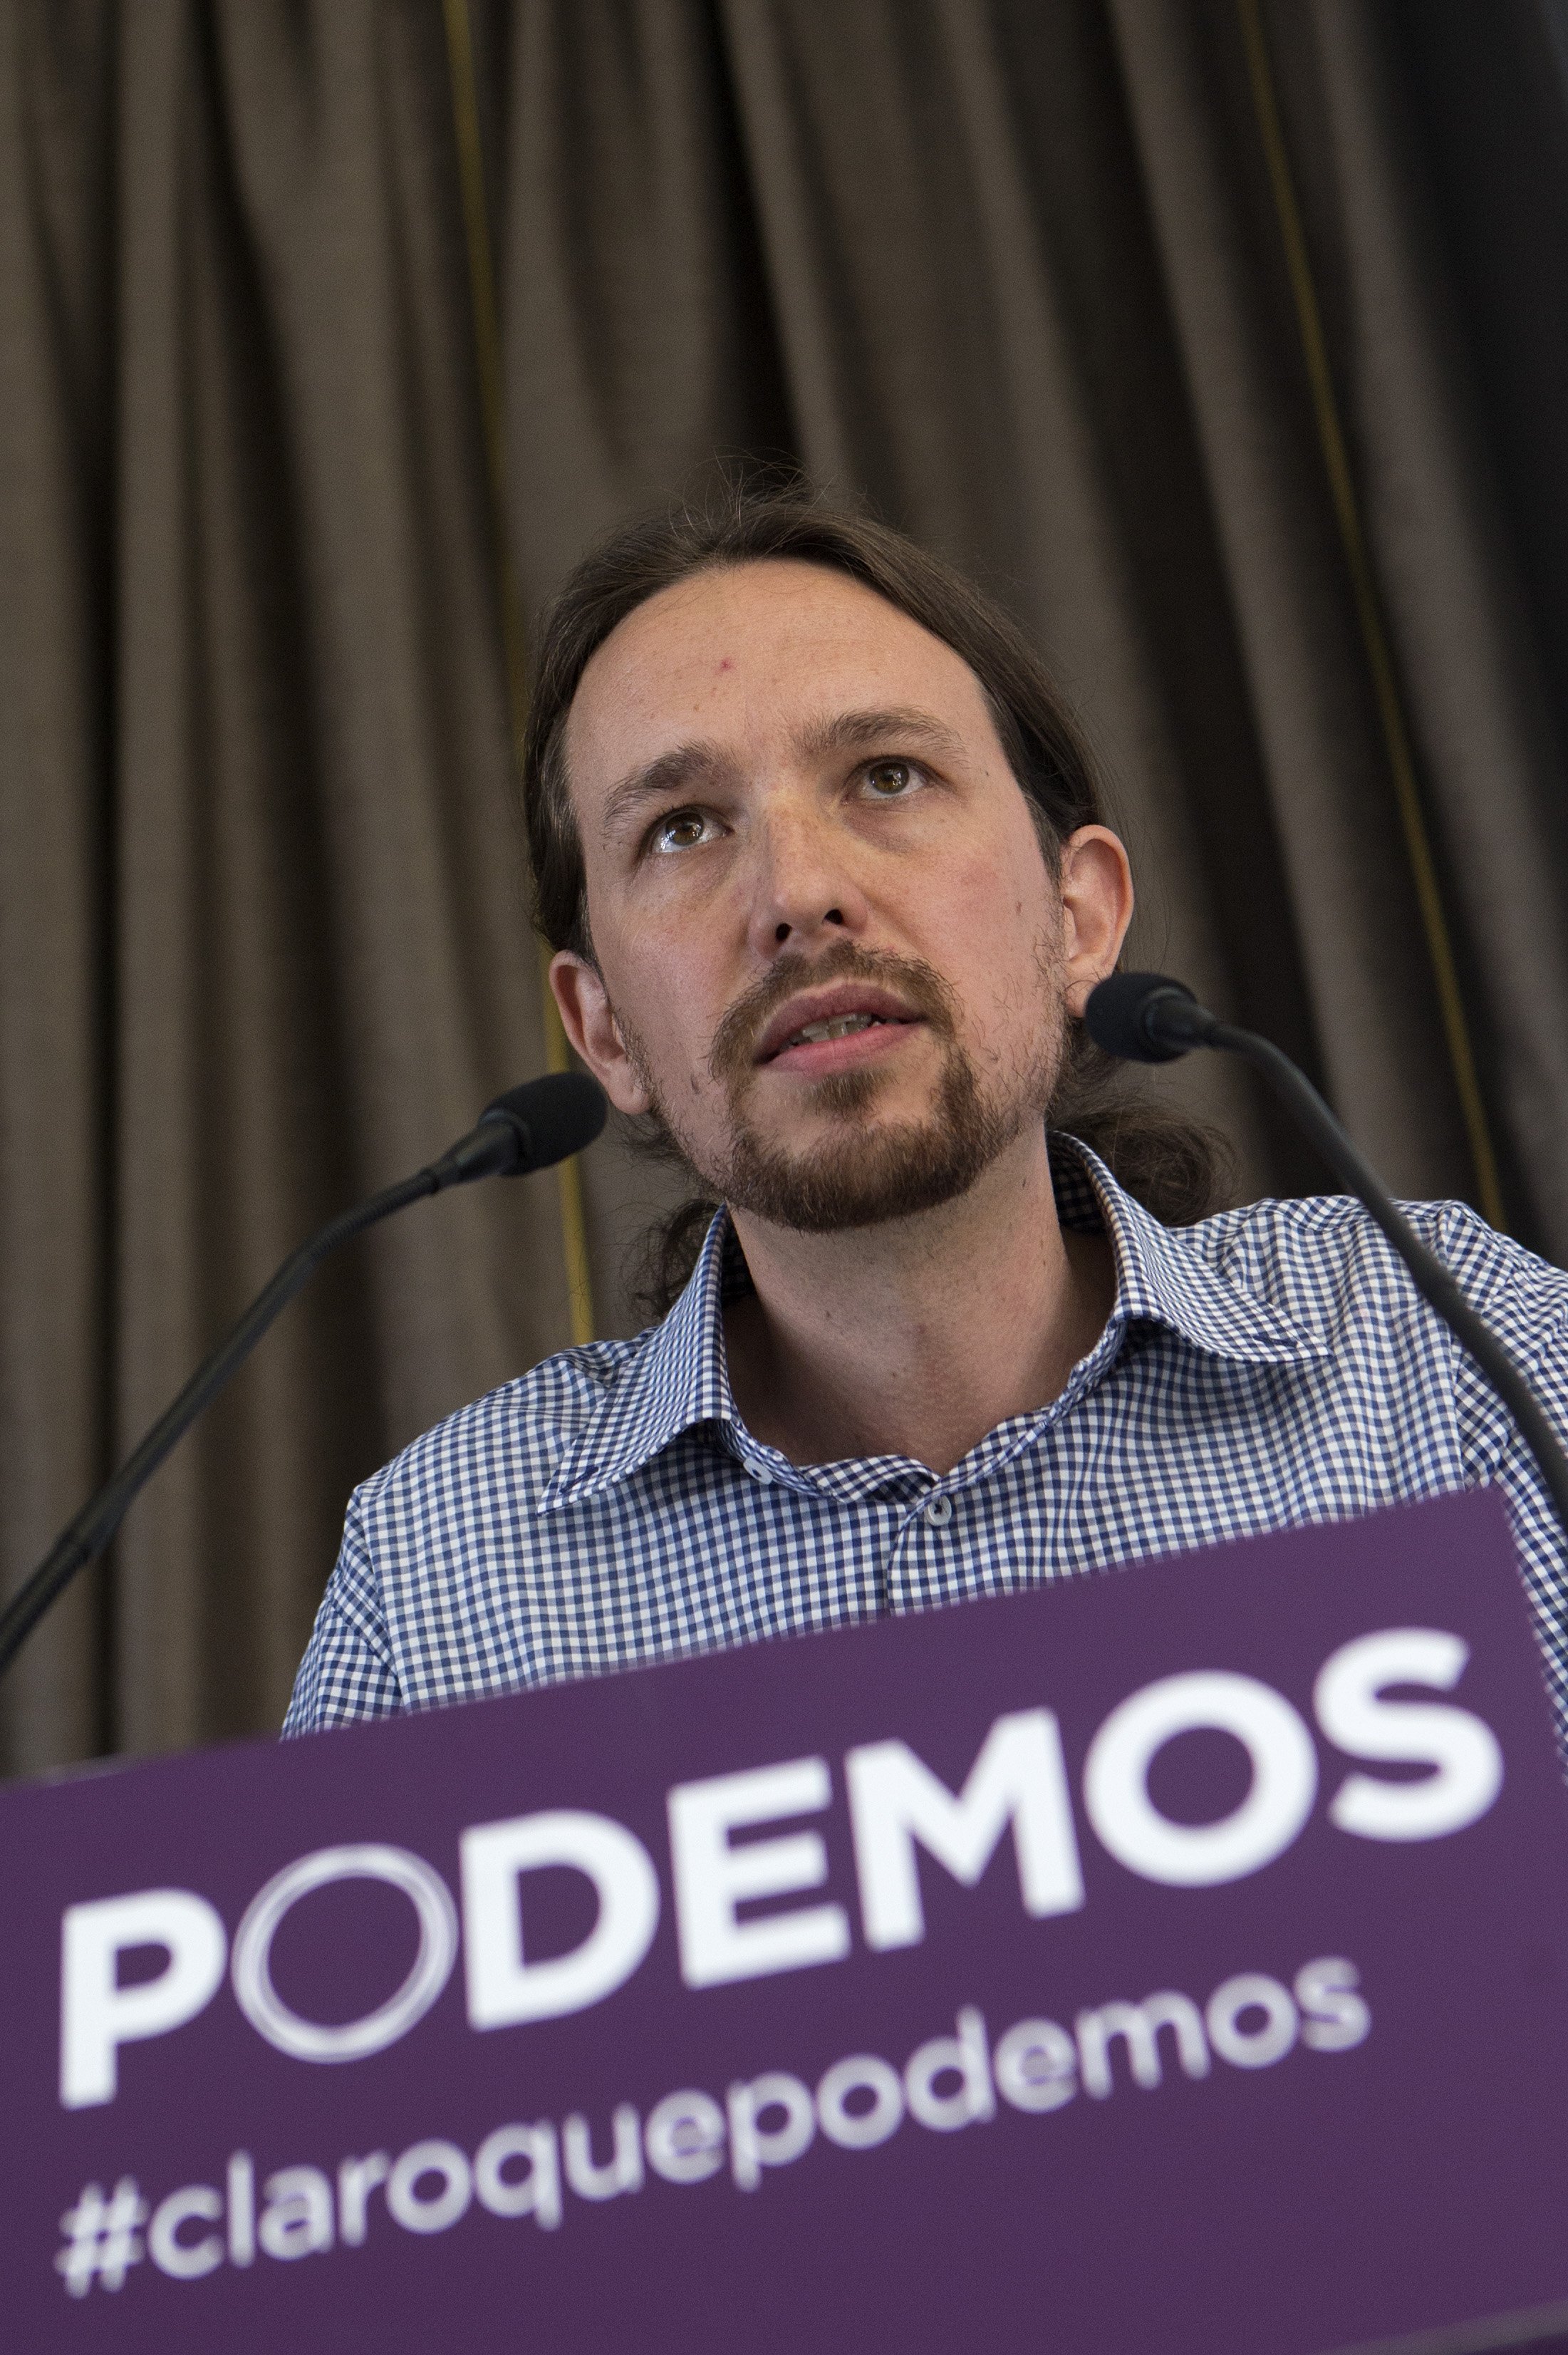 Pablo Iglesias, the leader of the leftist Podemos (We Can) party, speaks during a news conference in Madrid on May 30, 2014. (Paul White—AP)